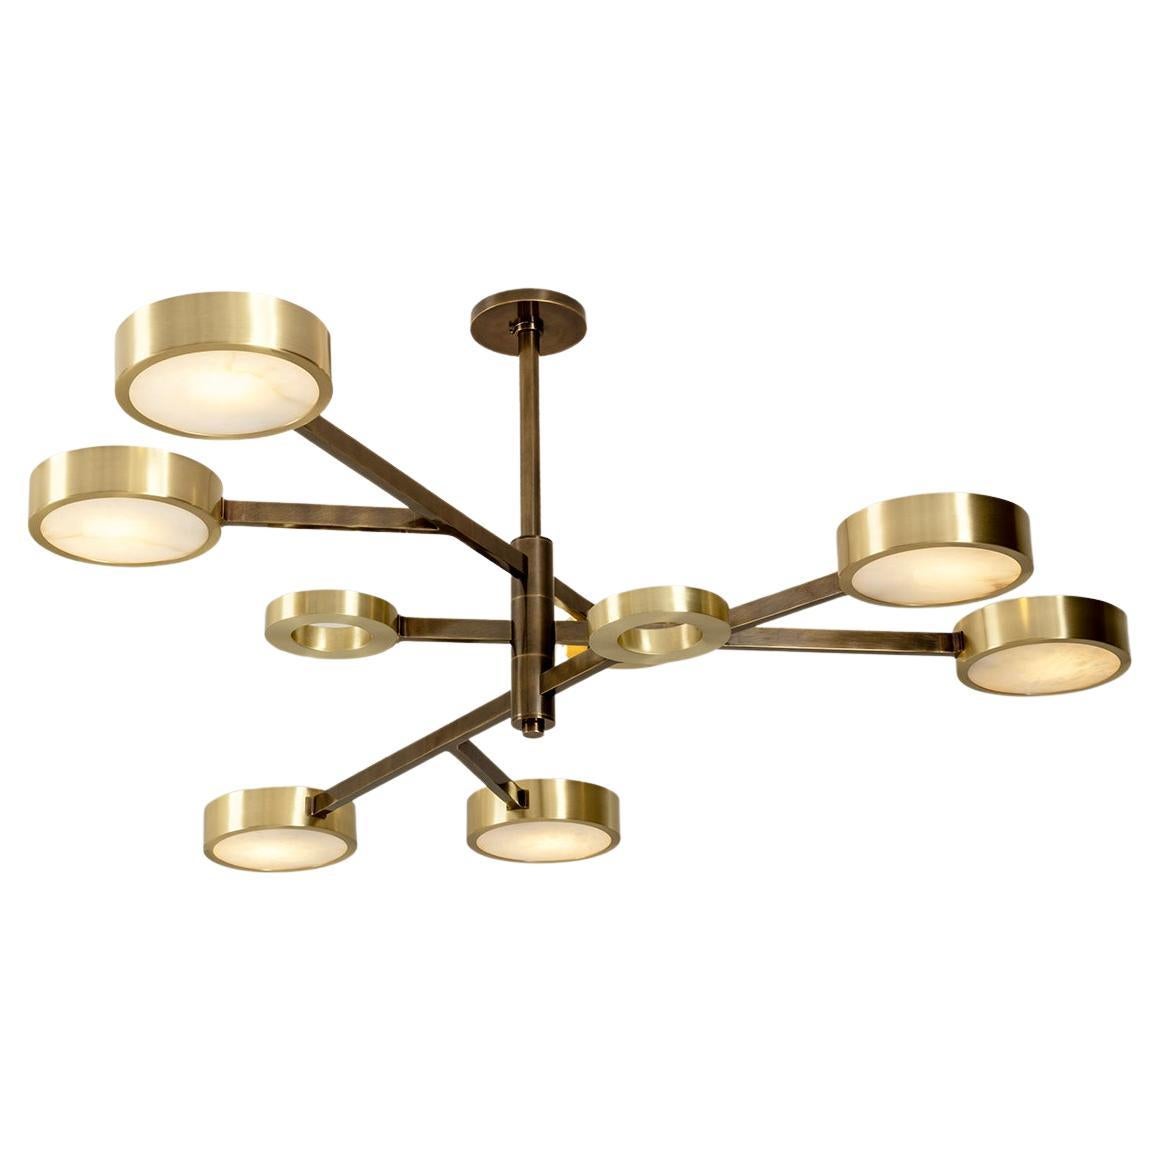 Volterra Ceiling Light by Gaspare Asaro-Bronze and Satin Brass Finish